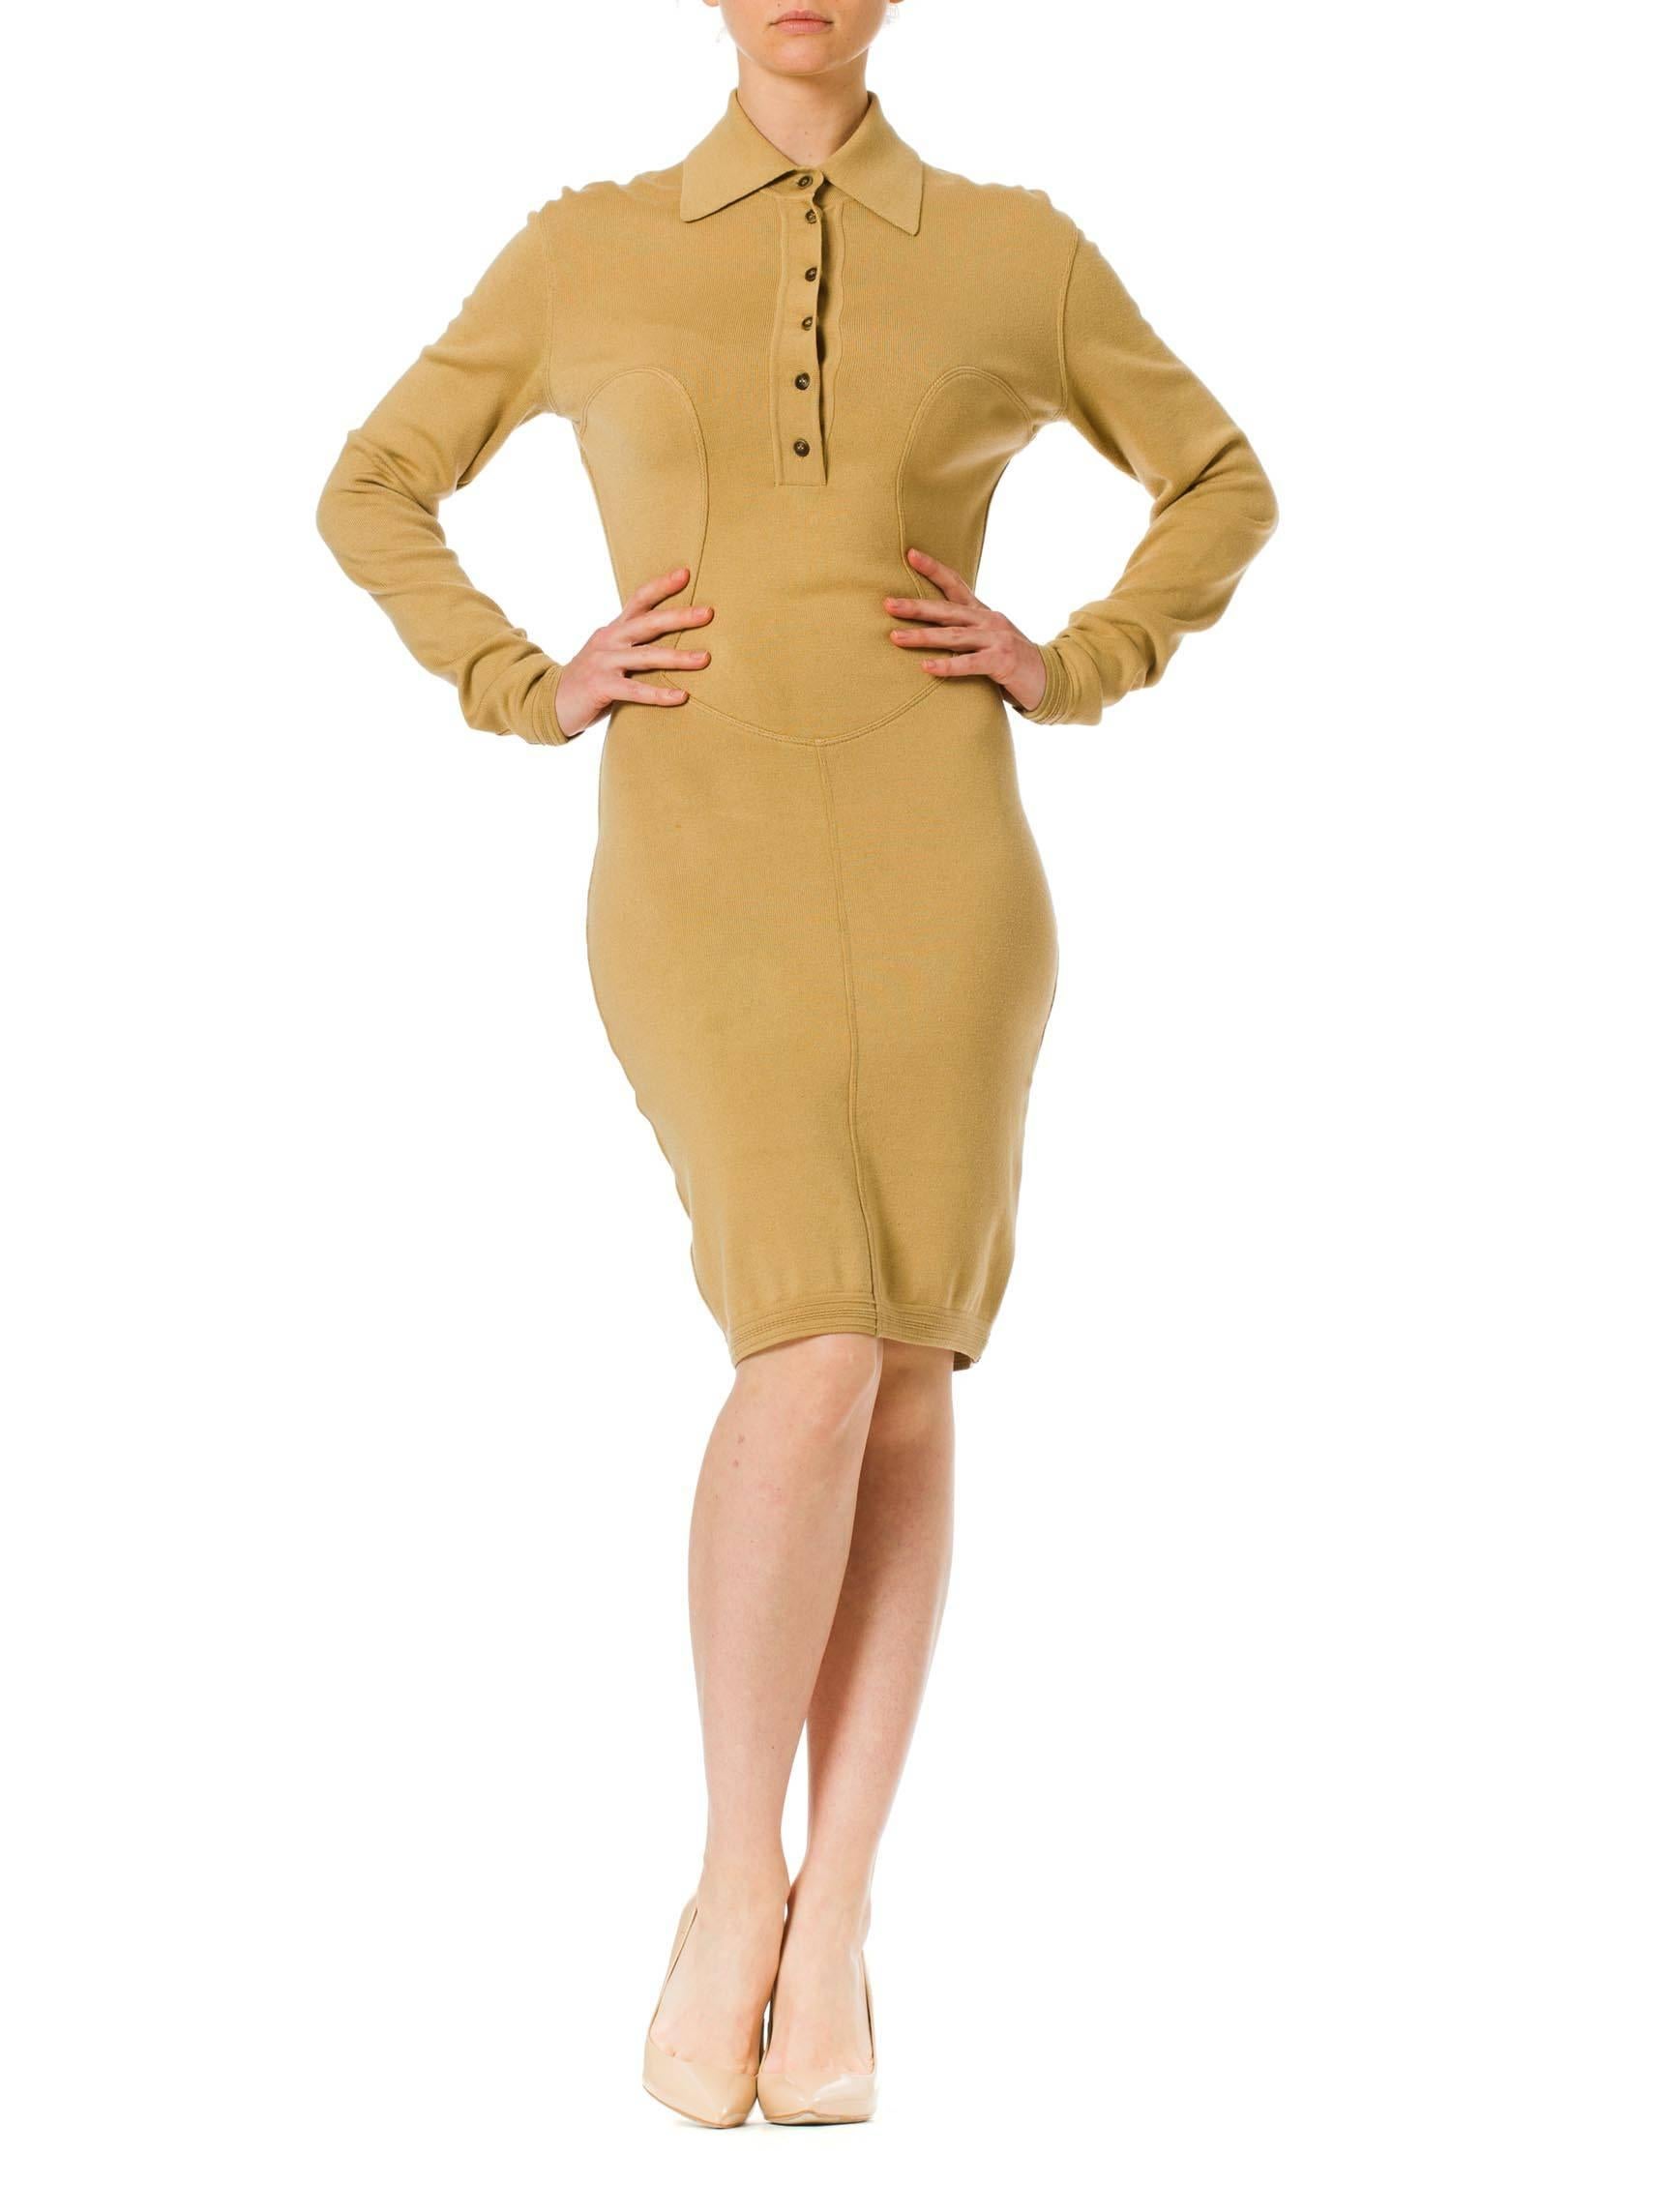 This is a tan jersey knit day dress with a plunging button-up neckline and complex seamlines. The princess-line seams over the bust extend into a v-bottomed inset over the hips, and finally a vertical seam down center front to the hem. These lines